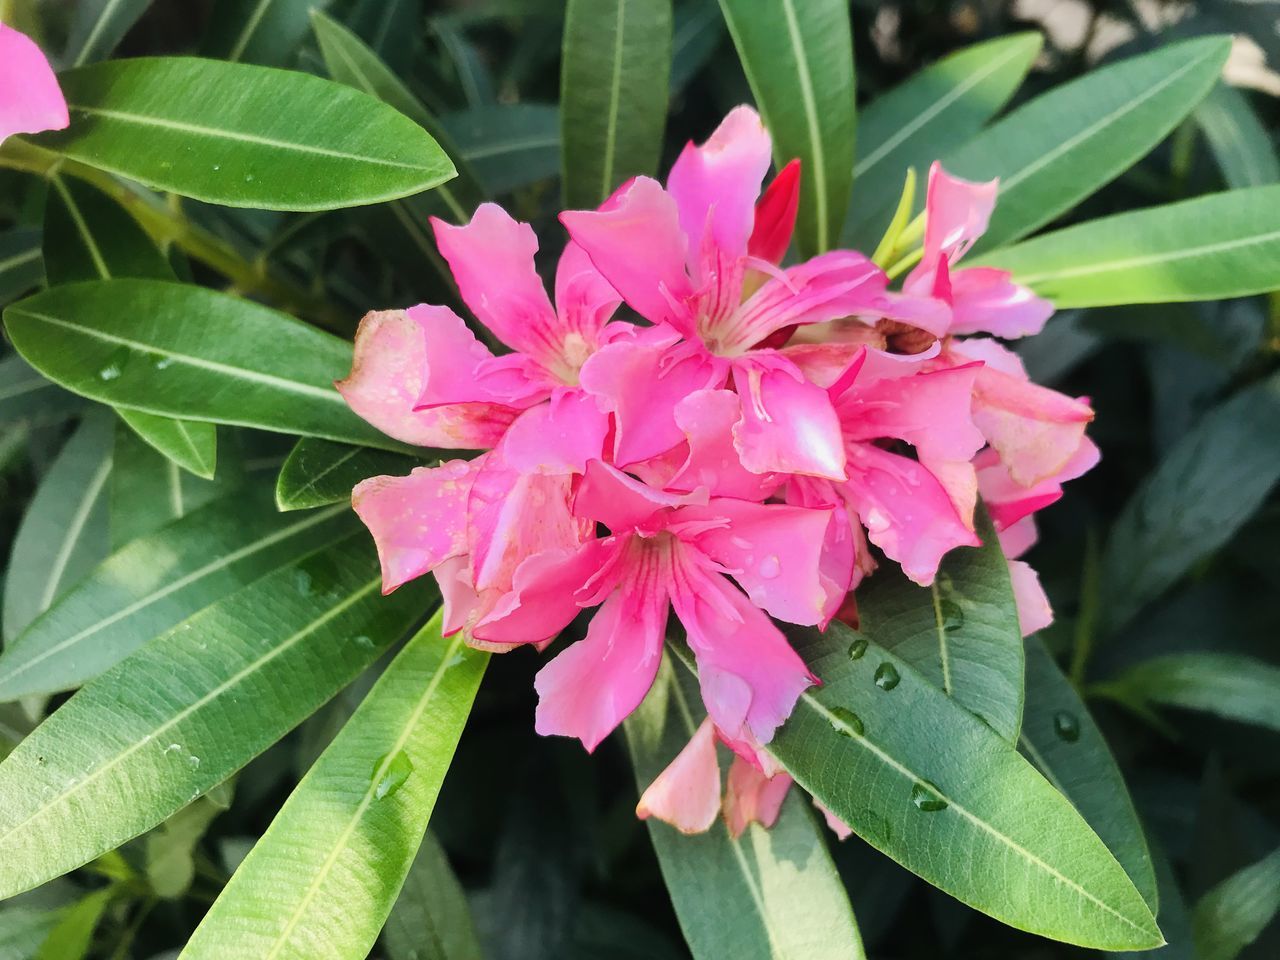 plant, flower, flowering plant, leaf, plant part, beauty in nature, pink, freshness, growth, close-up, petal, fragility, nature, inflorescence, flower head, green, shrub, no people, botany, outdoors, blossom, springtime, day, pollen